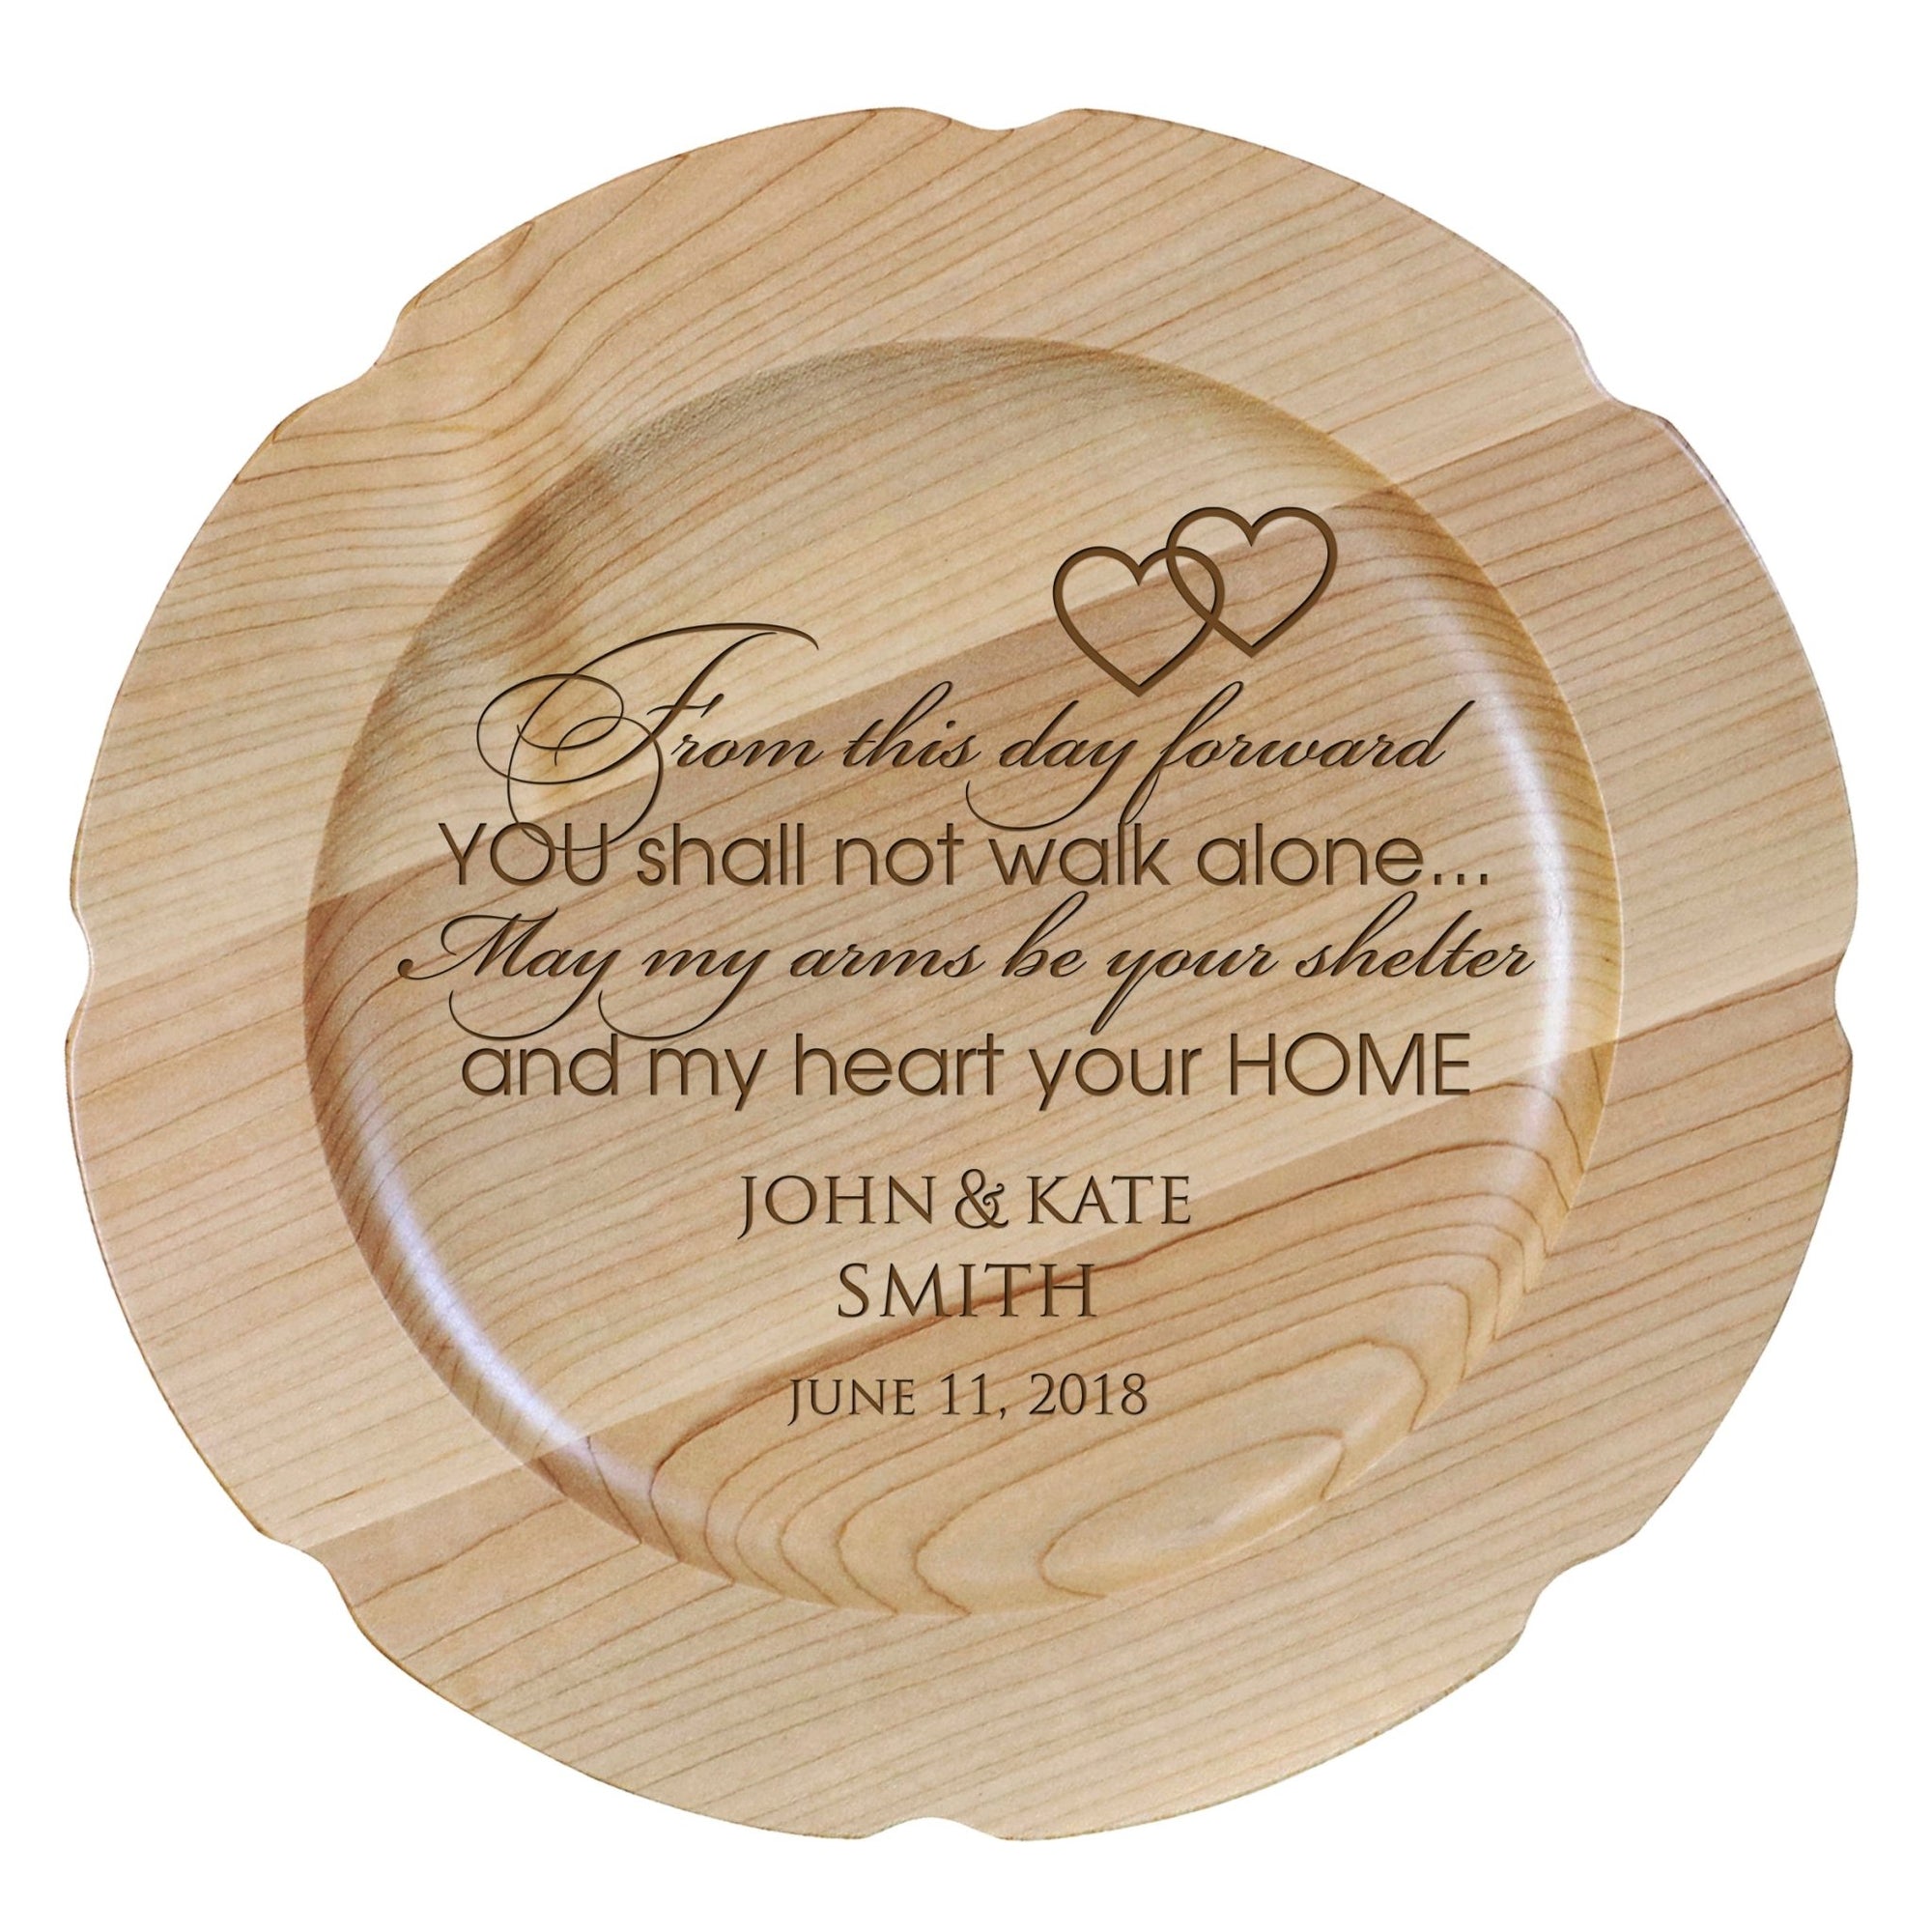 Personalized Inspirational Plates With Quotes - From This Day Forward - LifeSong Milestones